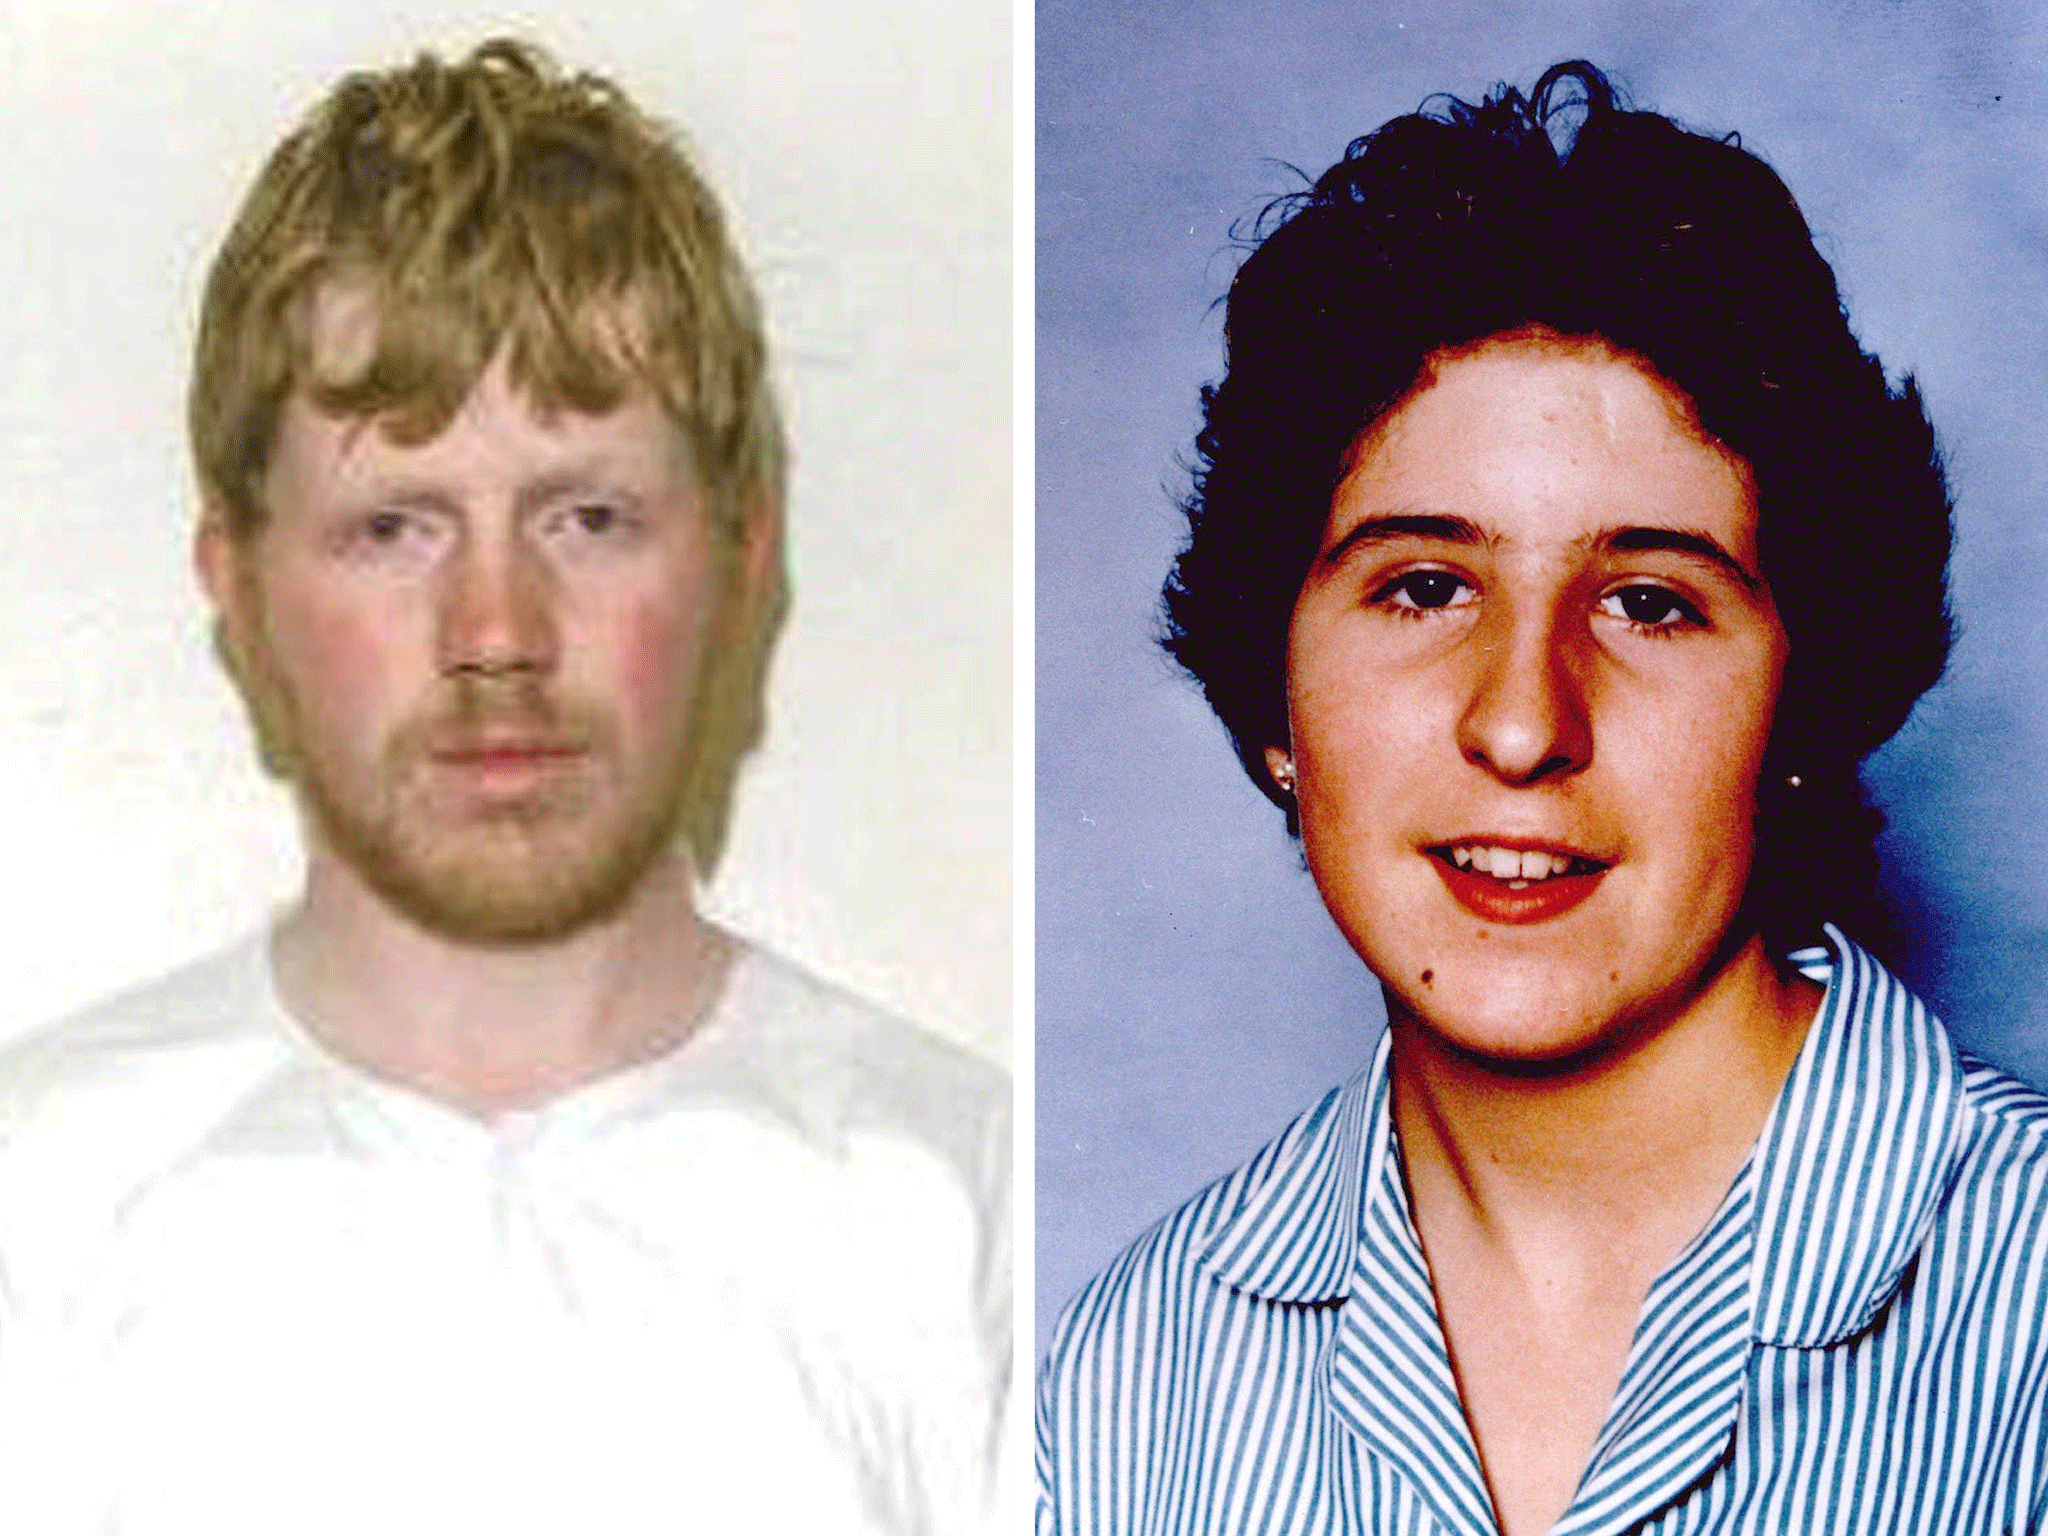 Colin Ash-Smith (left) has been jailed for life for the murder of Claire Tiltman (right) in 1993